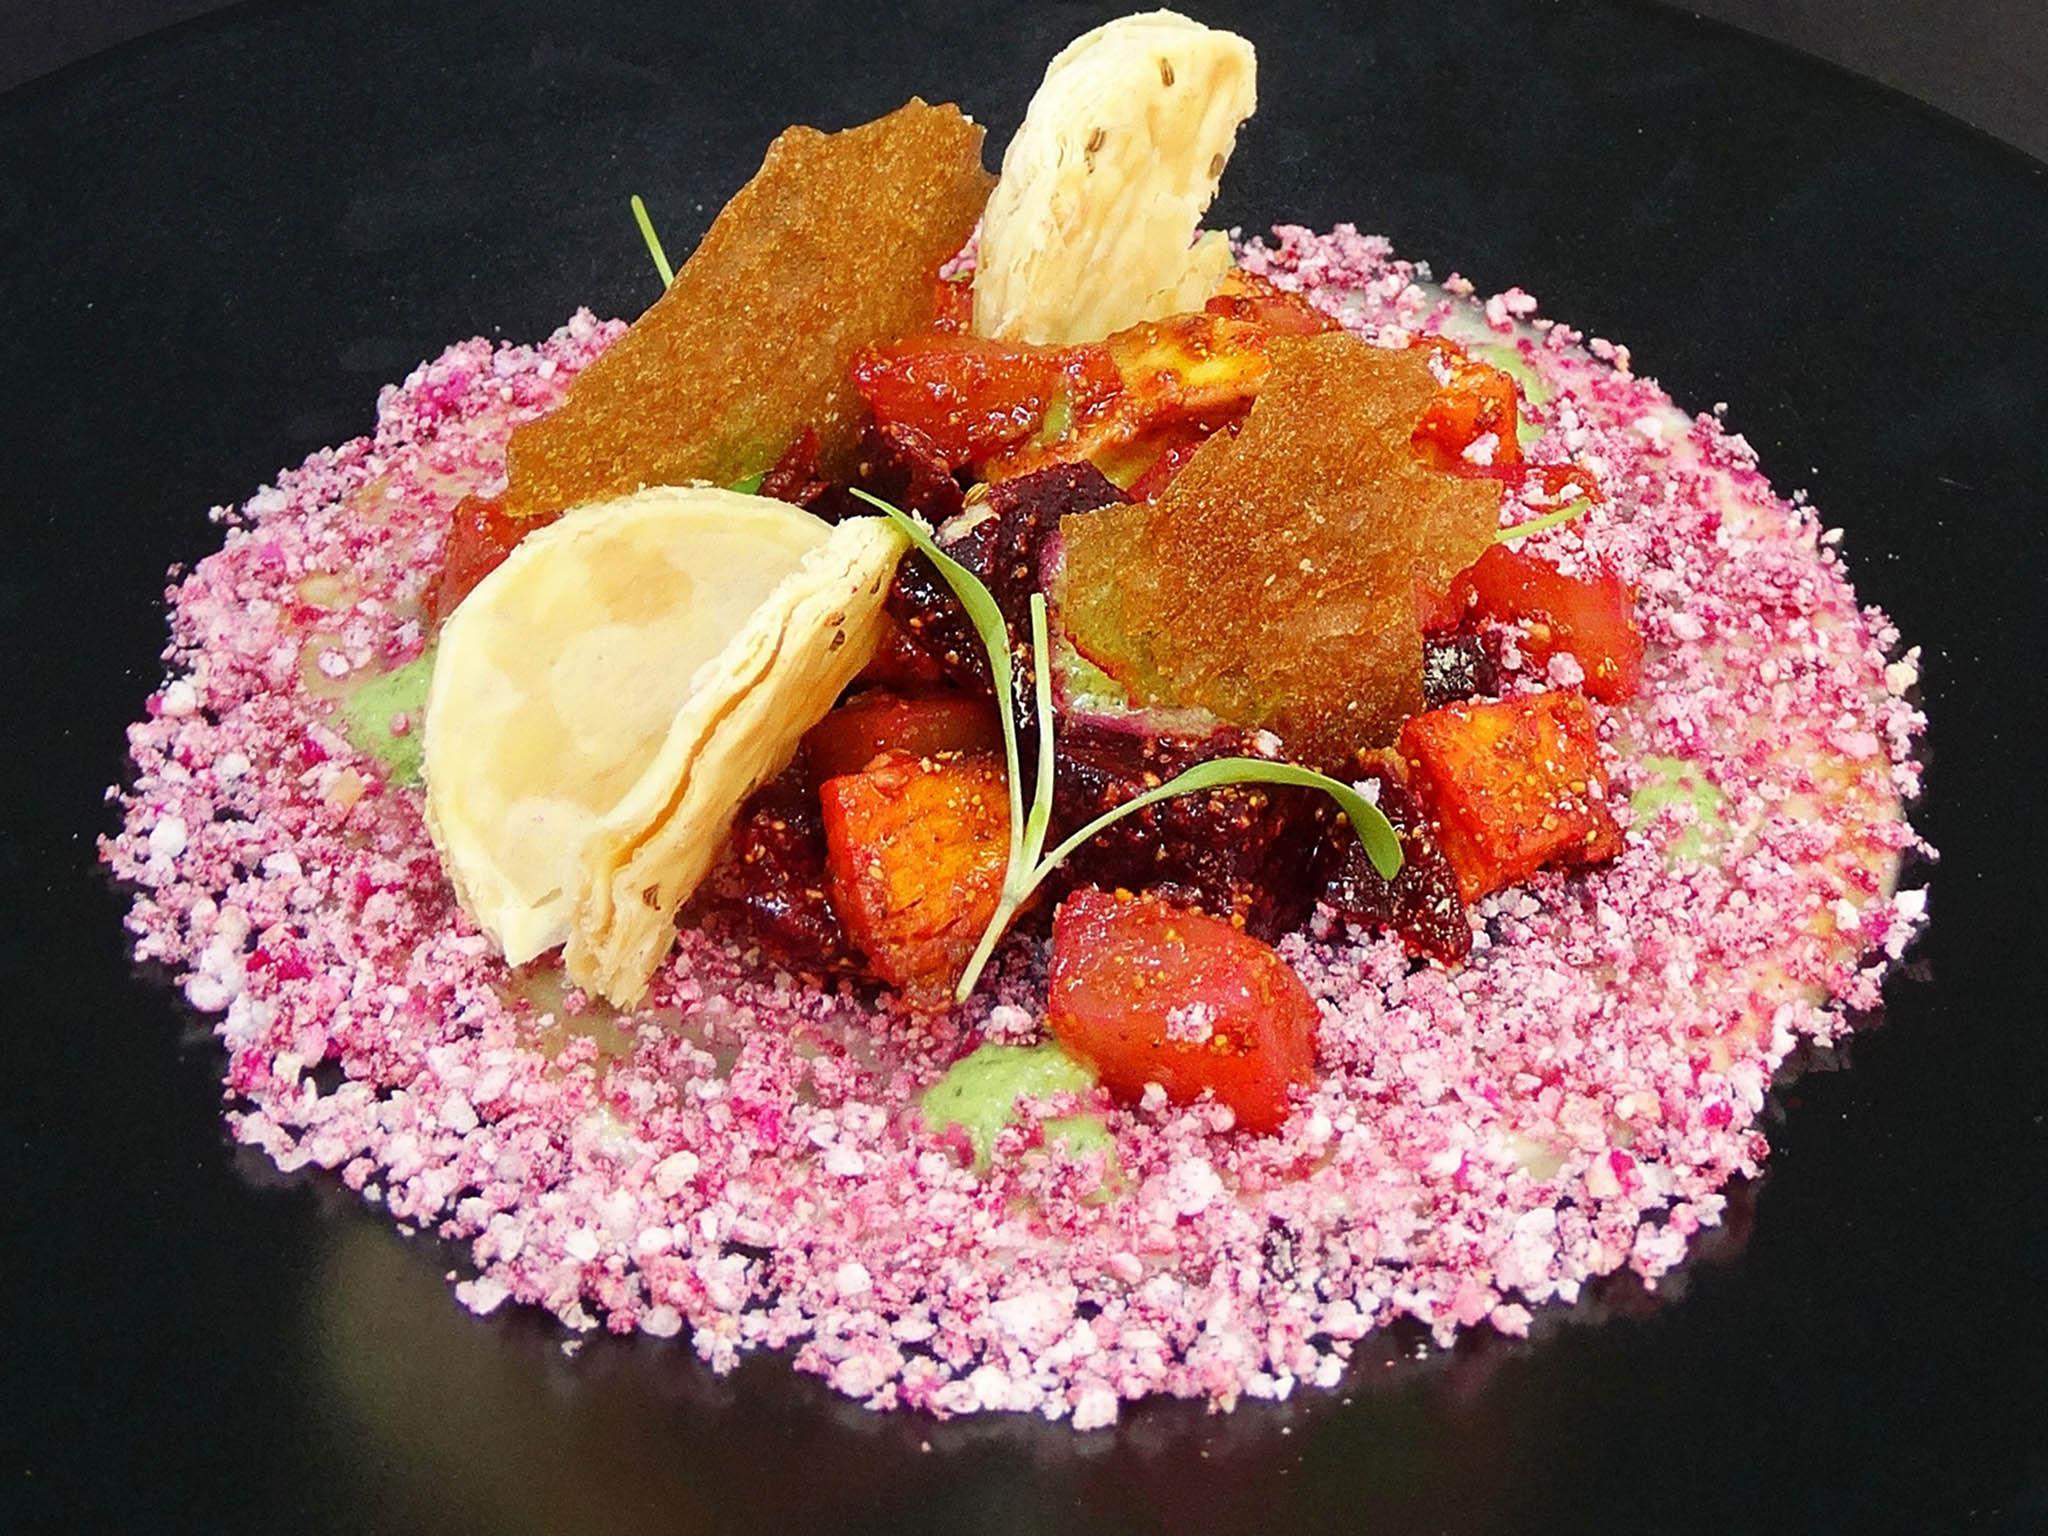 The heritage beetroot with sweet potato chaat starter